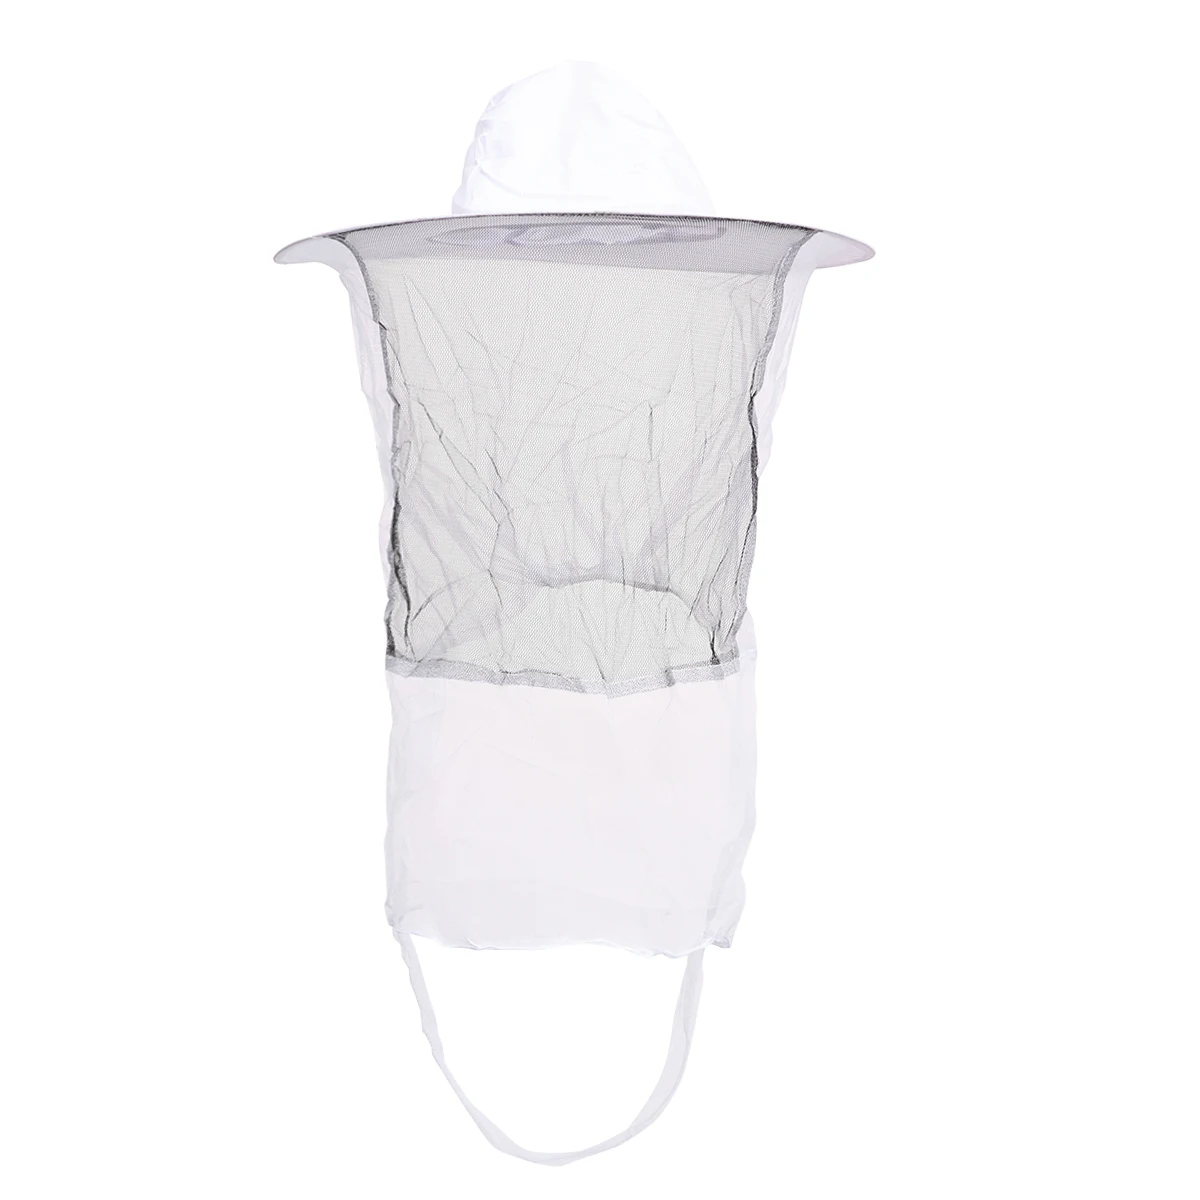 1PCS Anti-bee Hat Anti-smashing Portable Protective Travel Hiking Outdoor Mosquito Cap Hat Beekeeping Tool with Veil A30